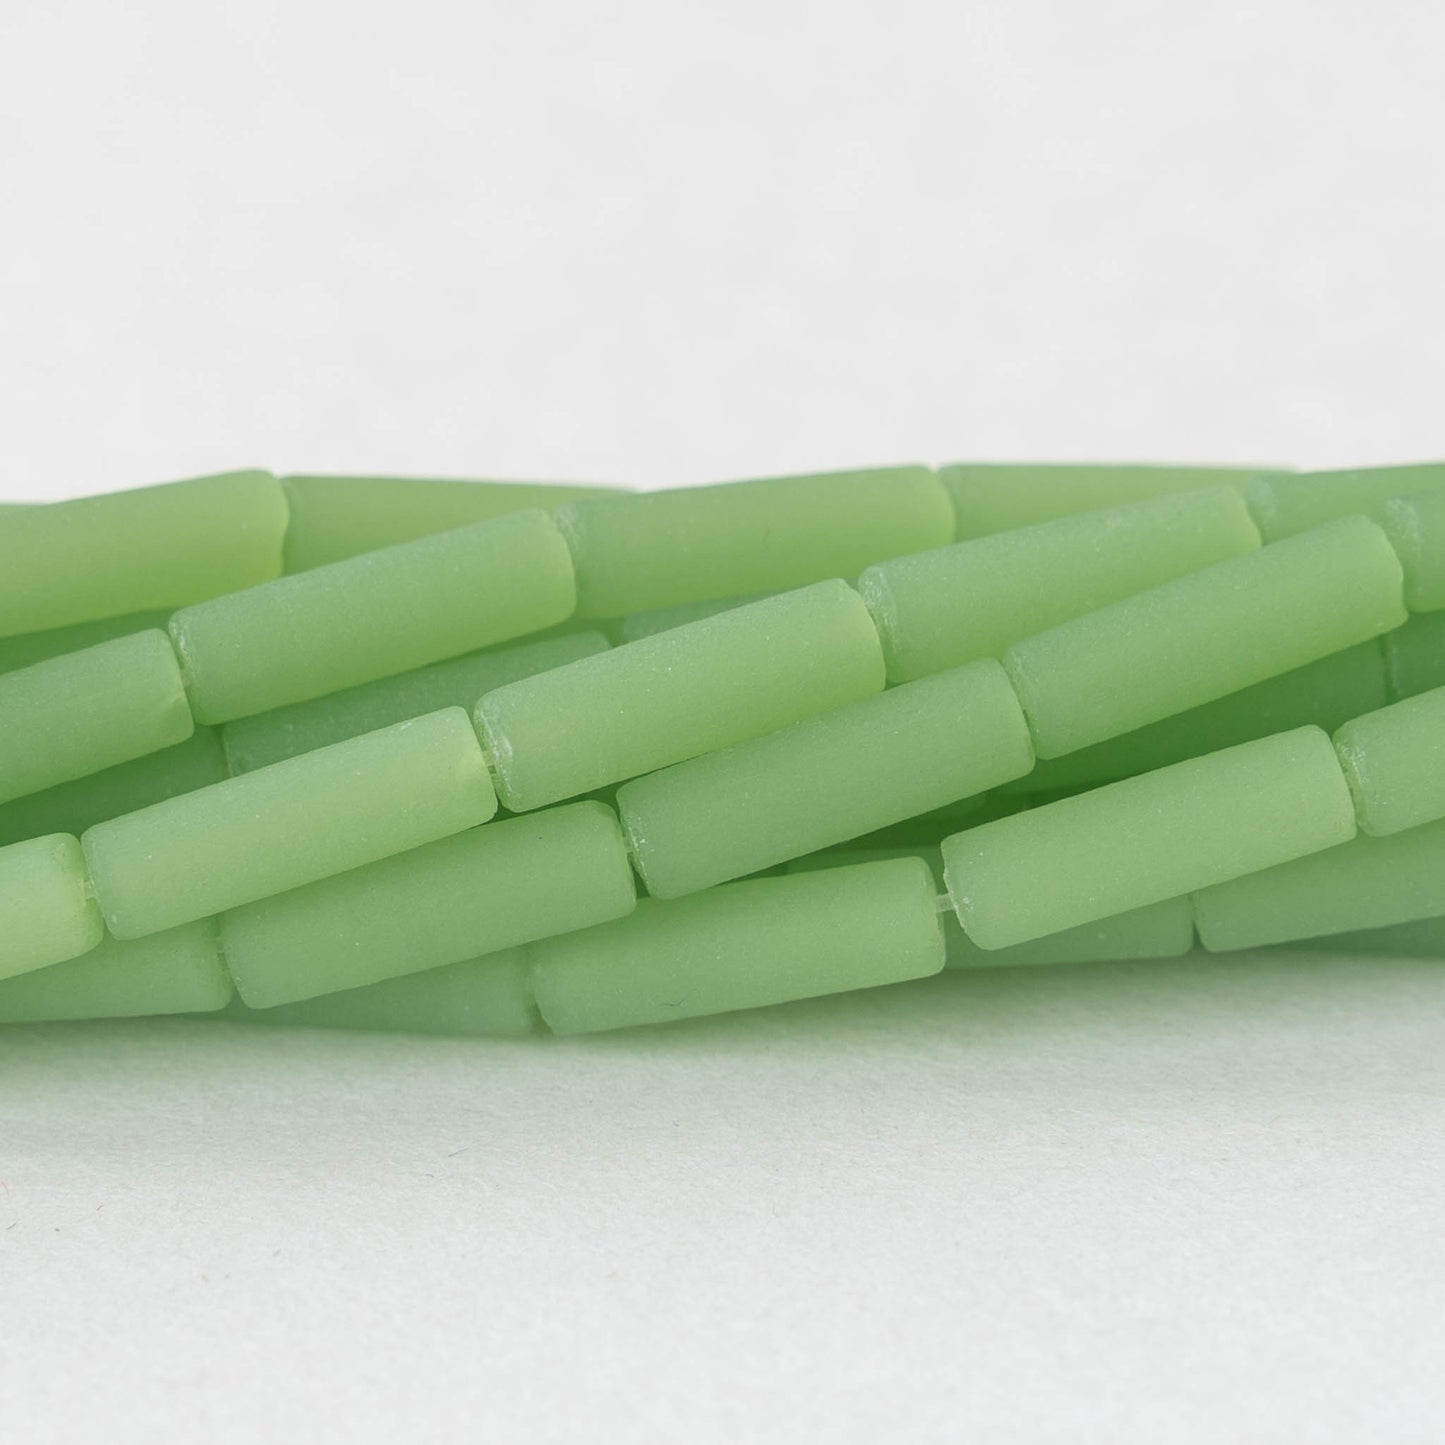 4x14mm Frosted Glass Tube Beads - Milky Opaque Seafoam - 30 or 90